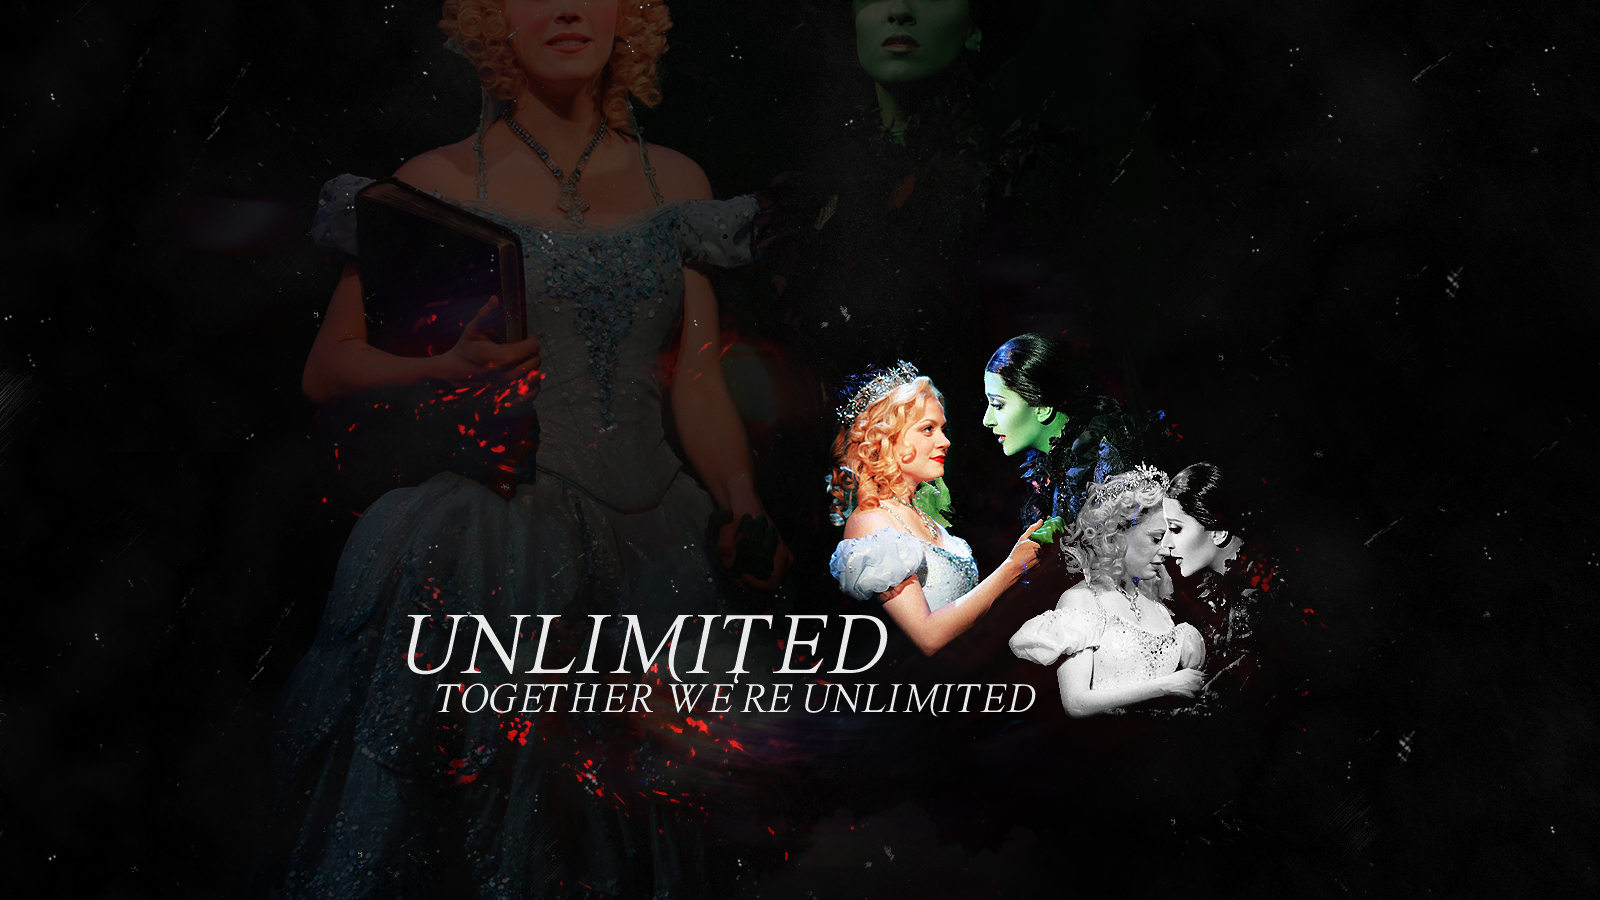 Unlimited   Wicked Wallpaper 15441614